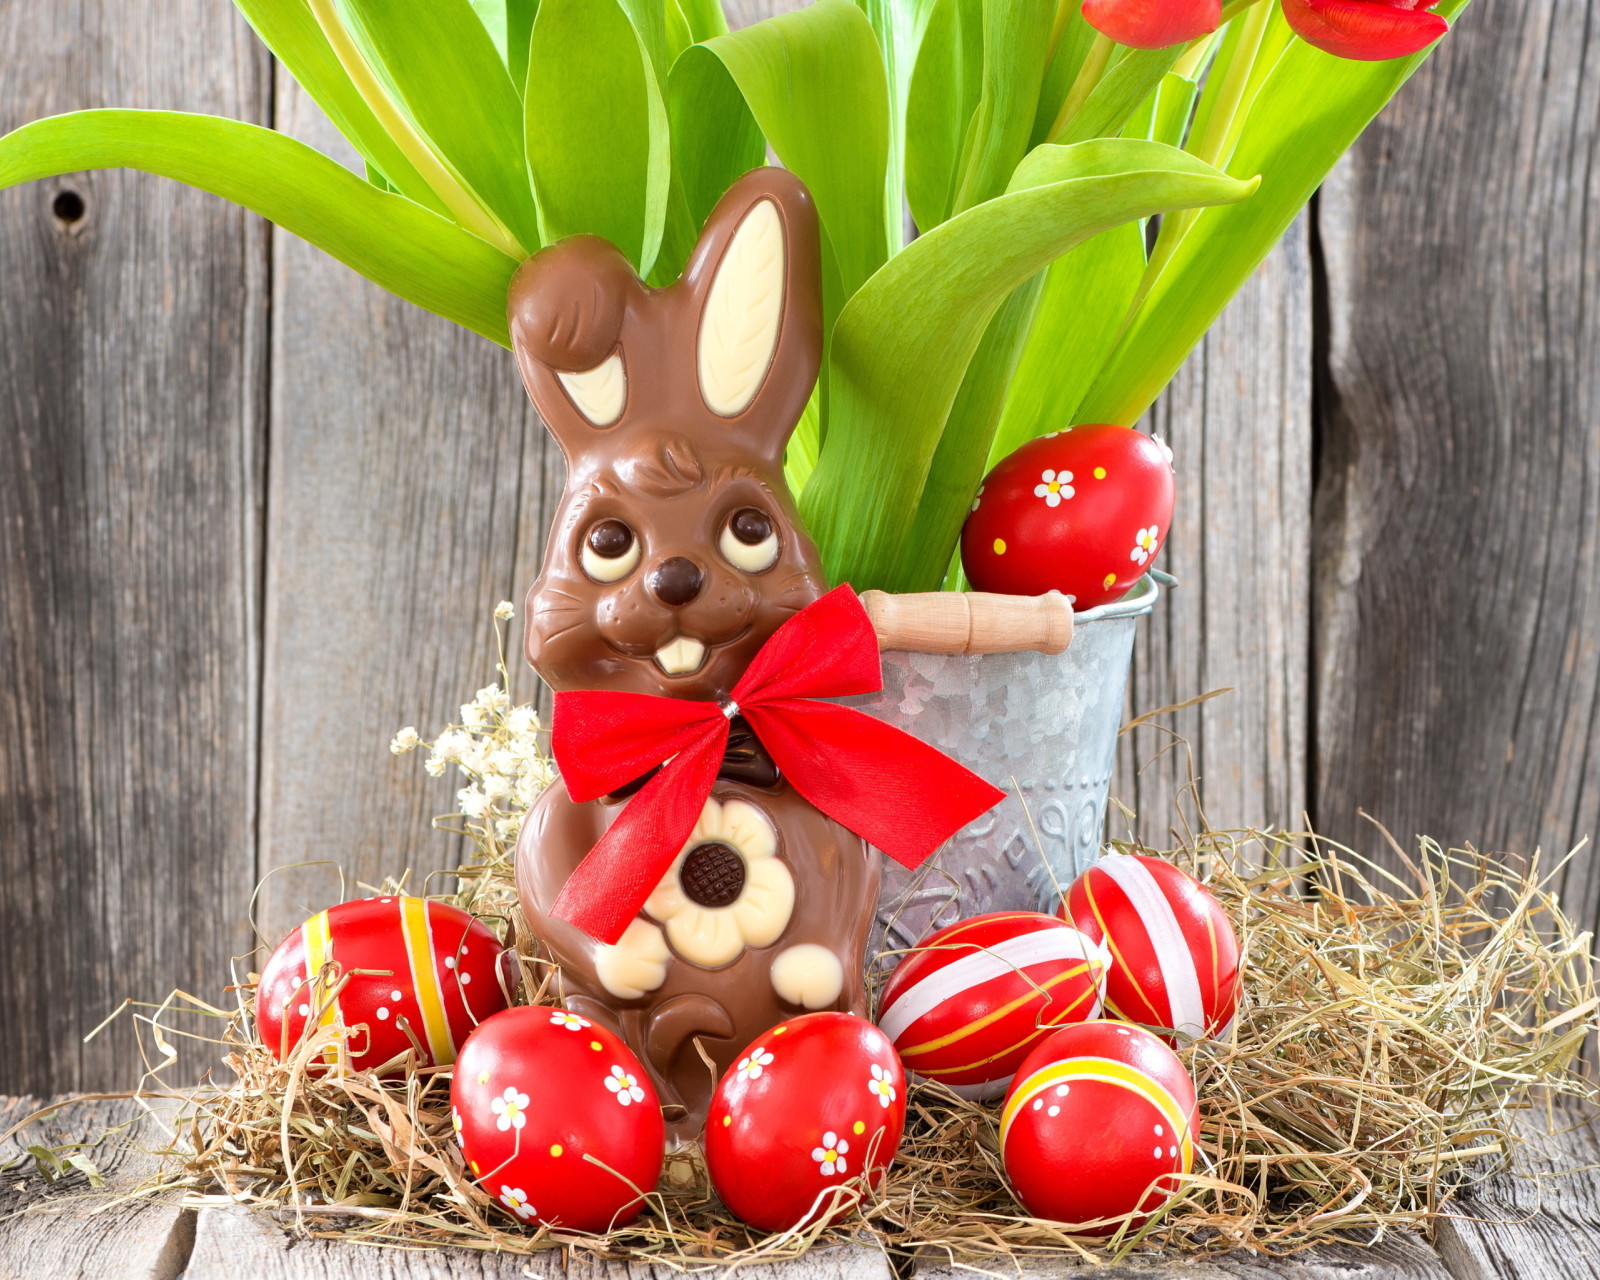 Chocolate Easter Bunny wallpaper 1600x1280